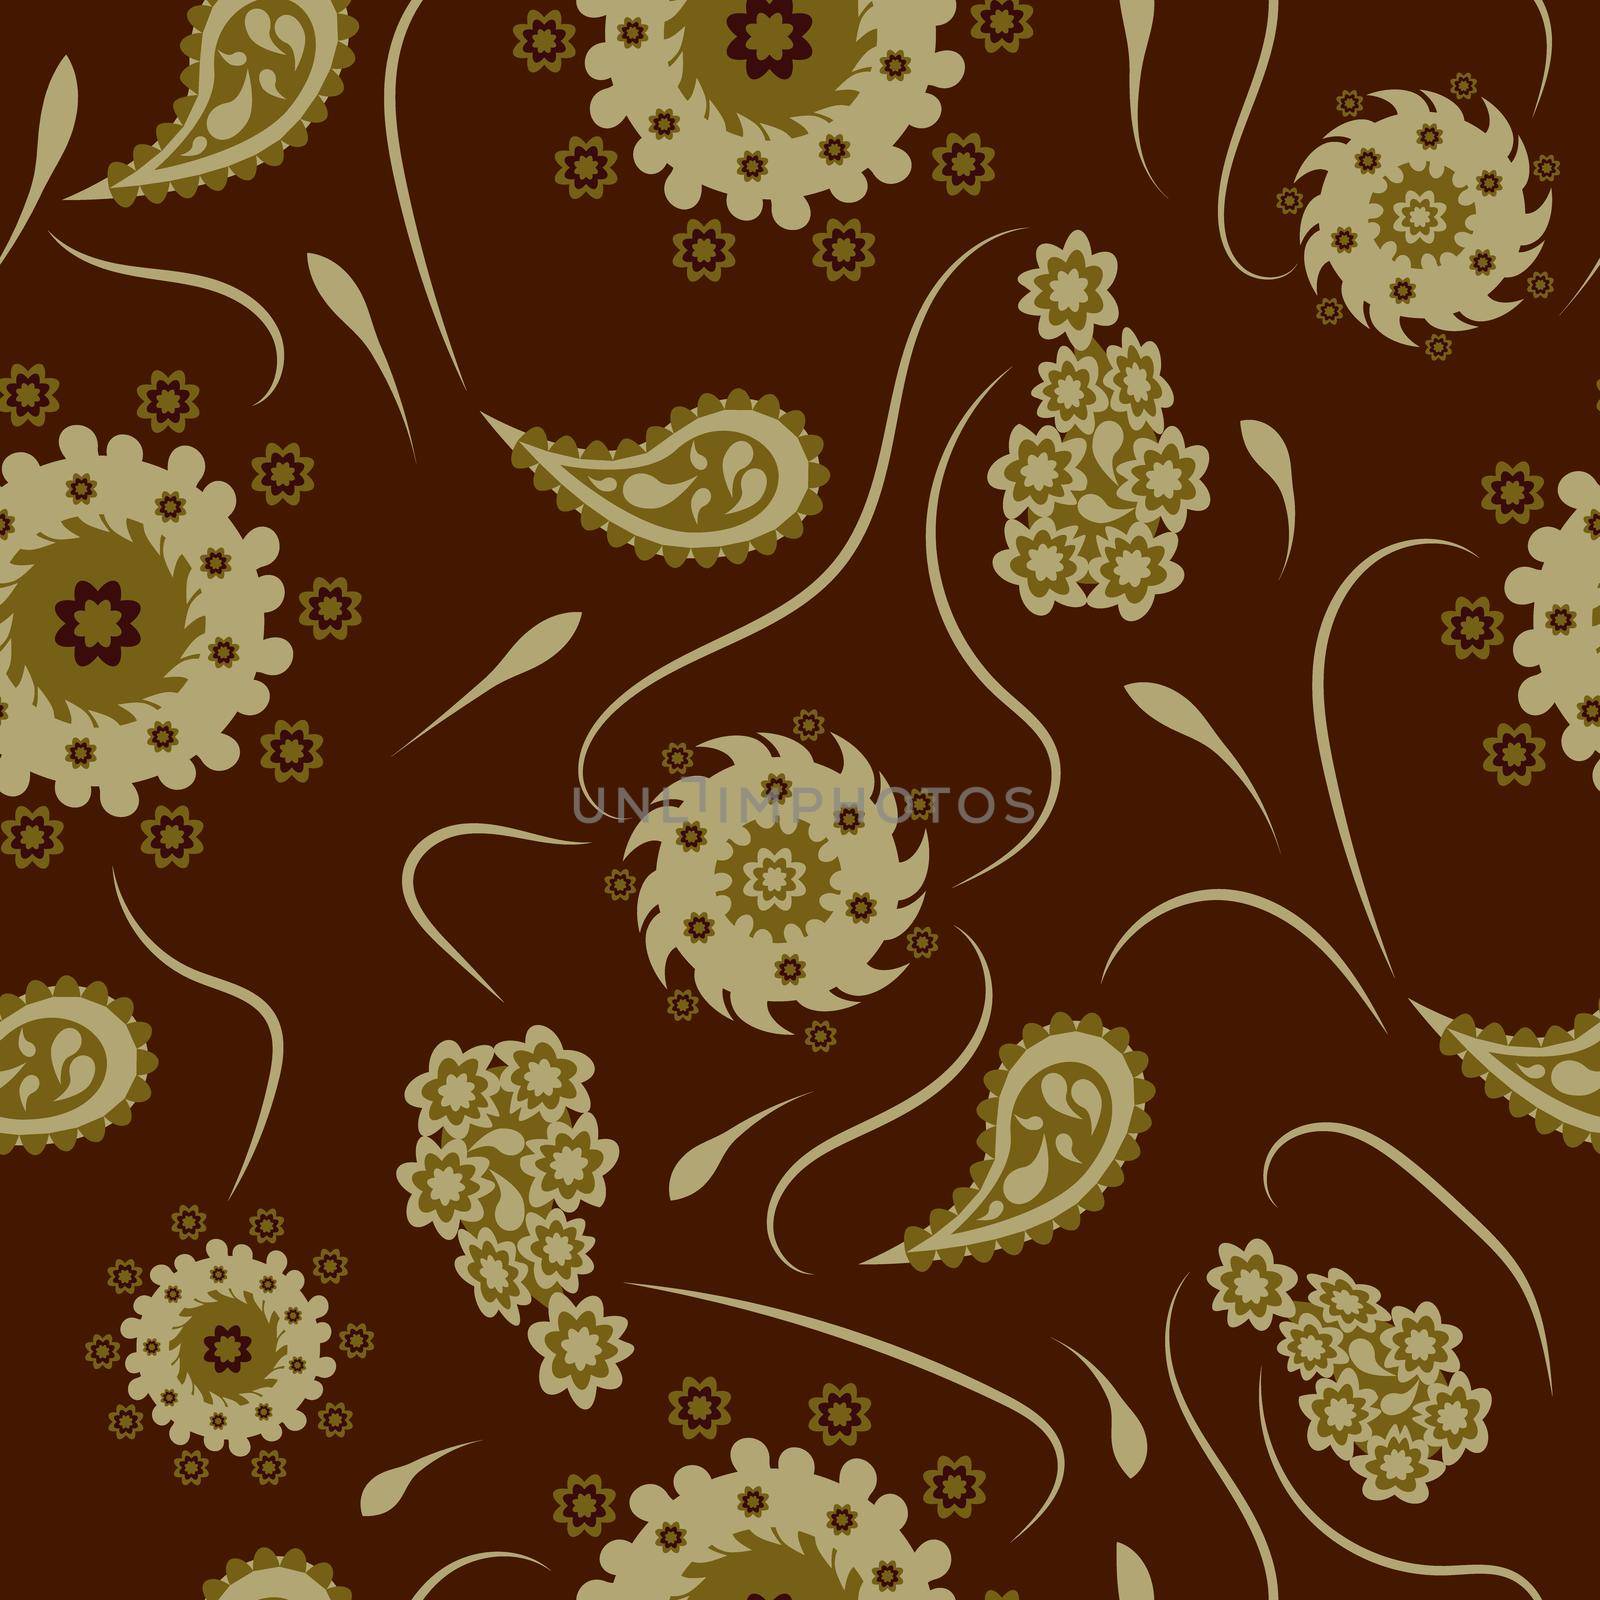 Floral pattern paisley style Paisley print. Doodle background by eskimos